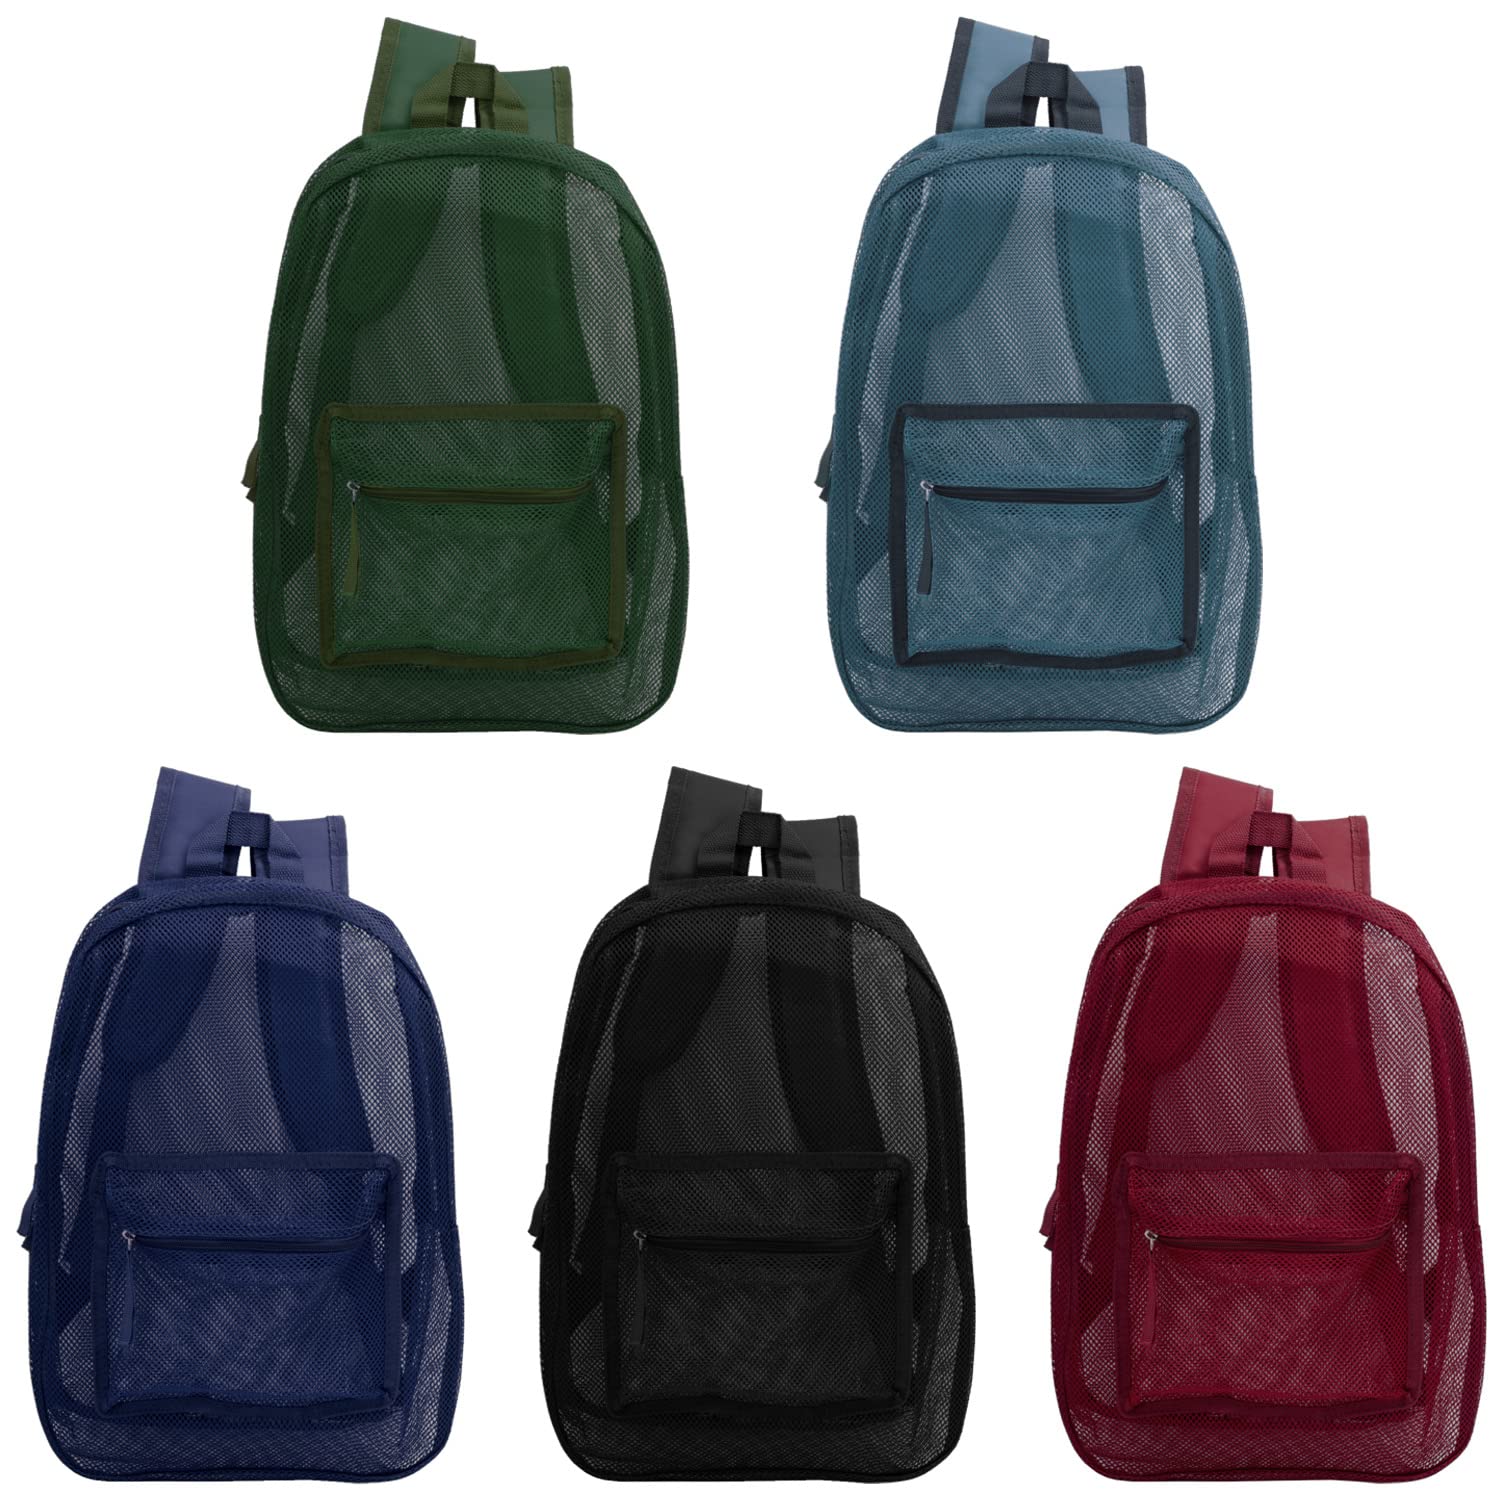 17" Transparent Wholesale Backpack in 5 Assorted Colors - Bulk Case of 24 Clear Bookbags